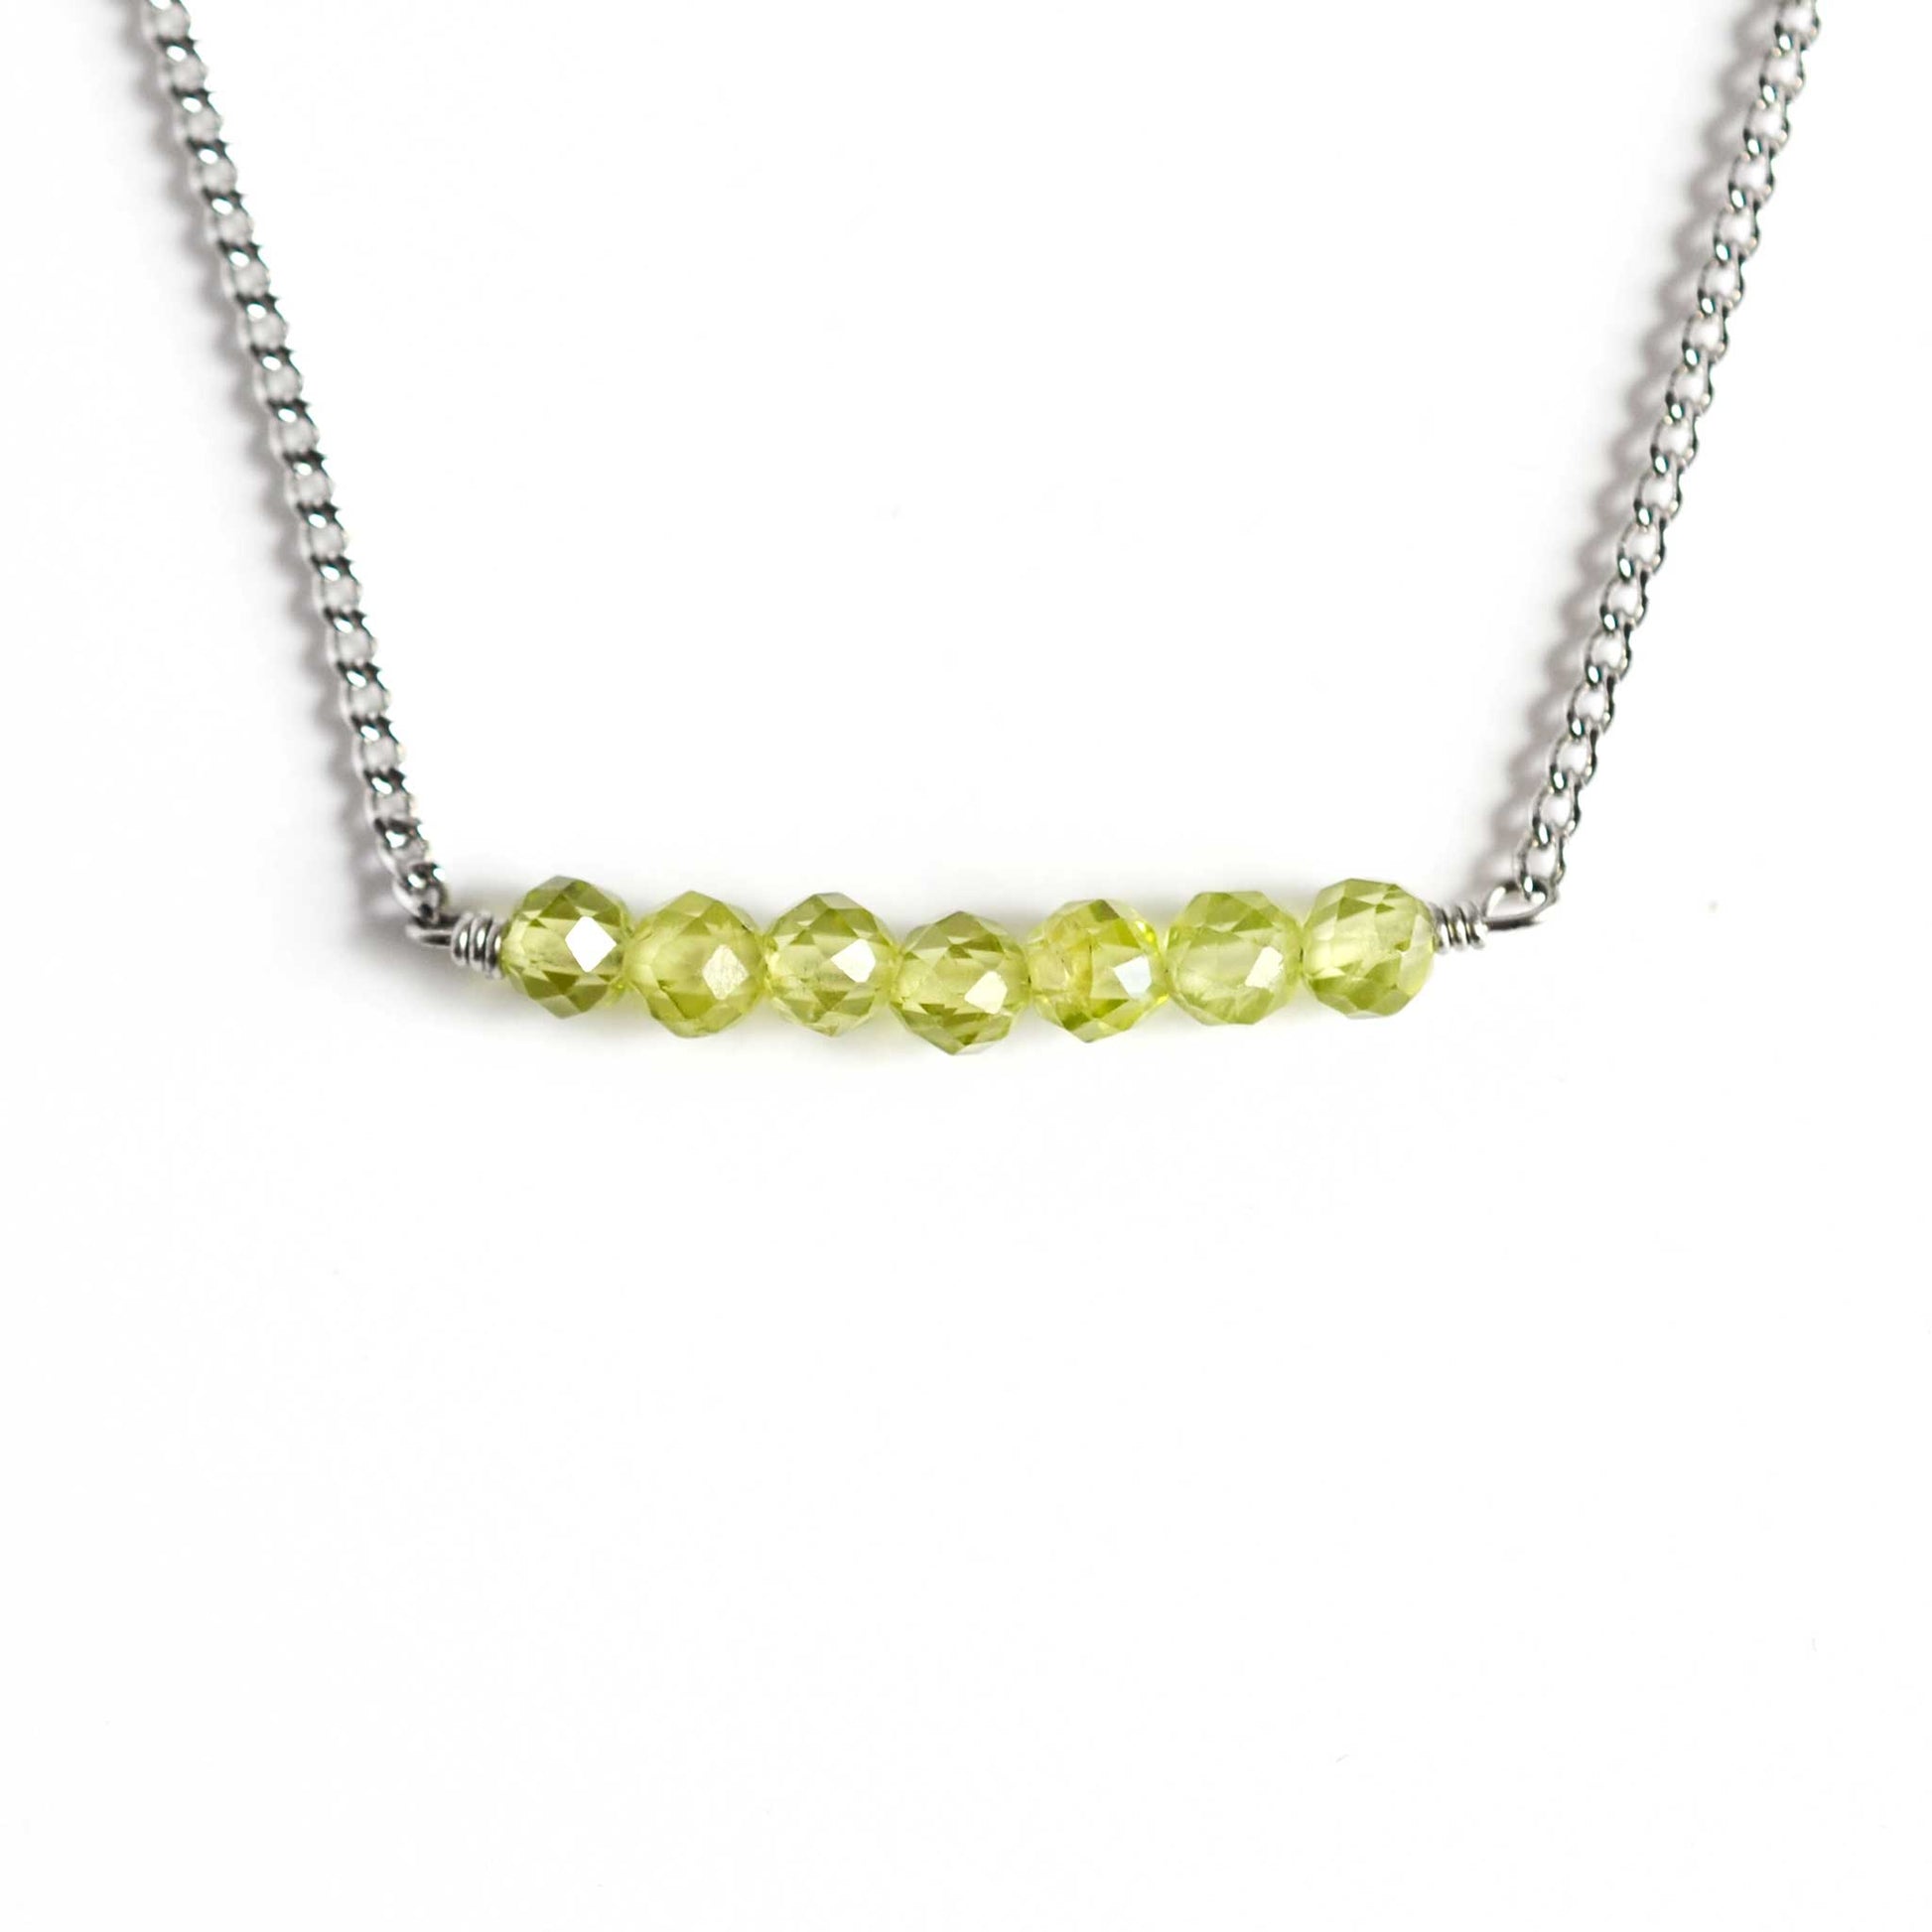 Dainty Peridot crystal necklace on stainless steel chain